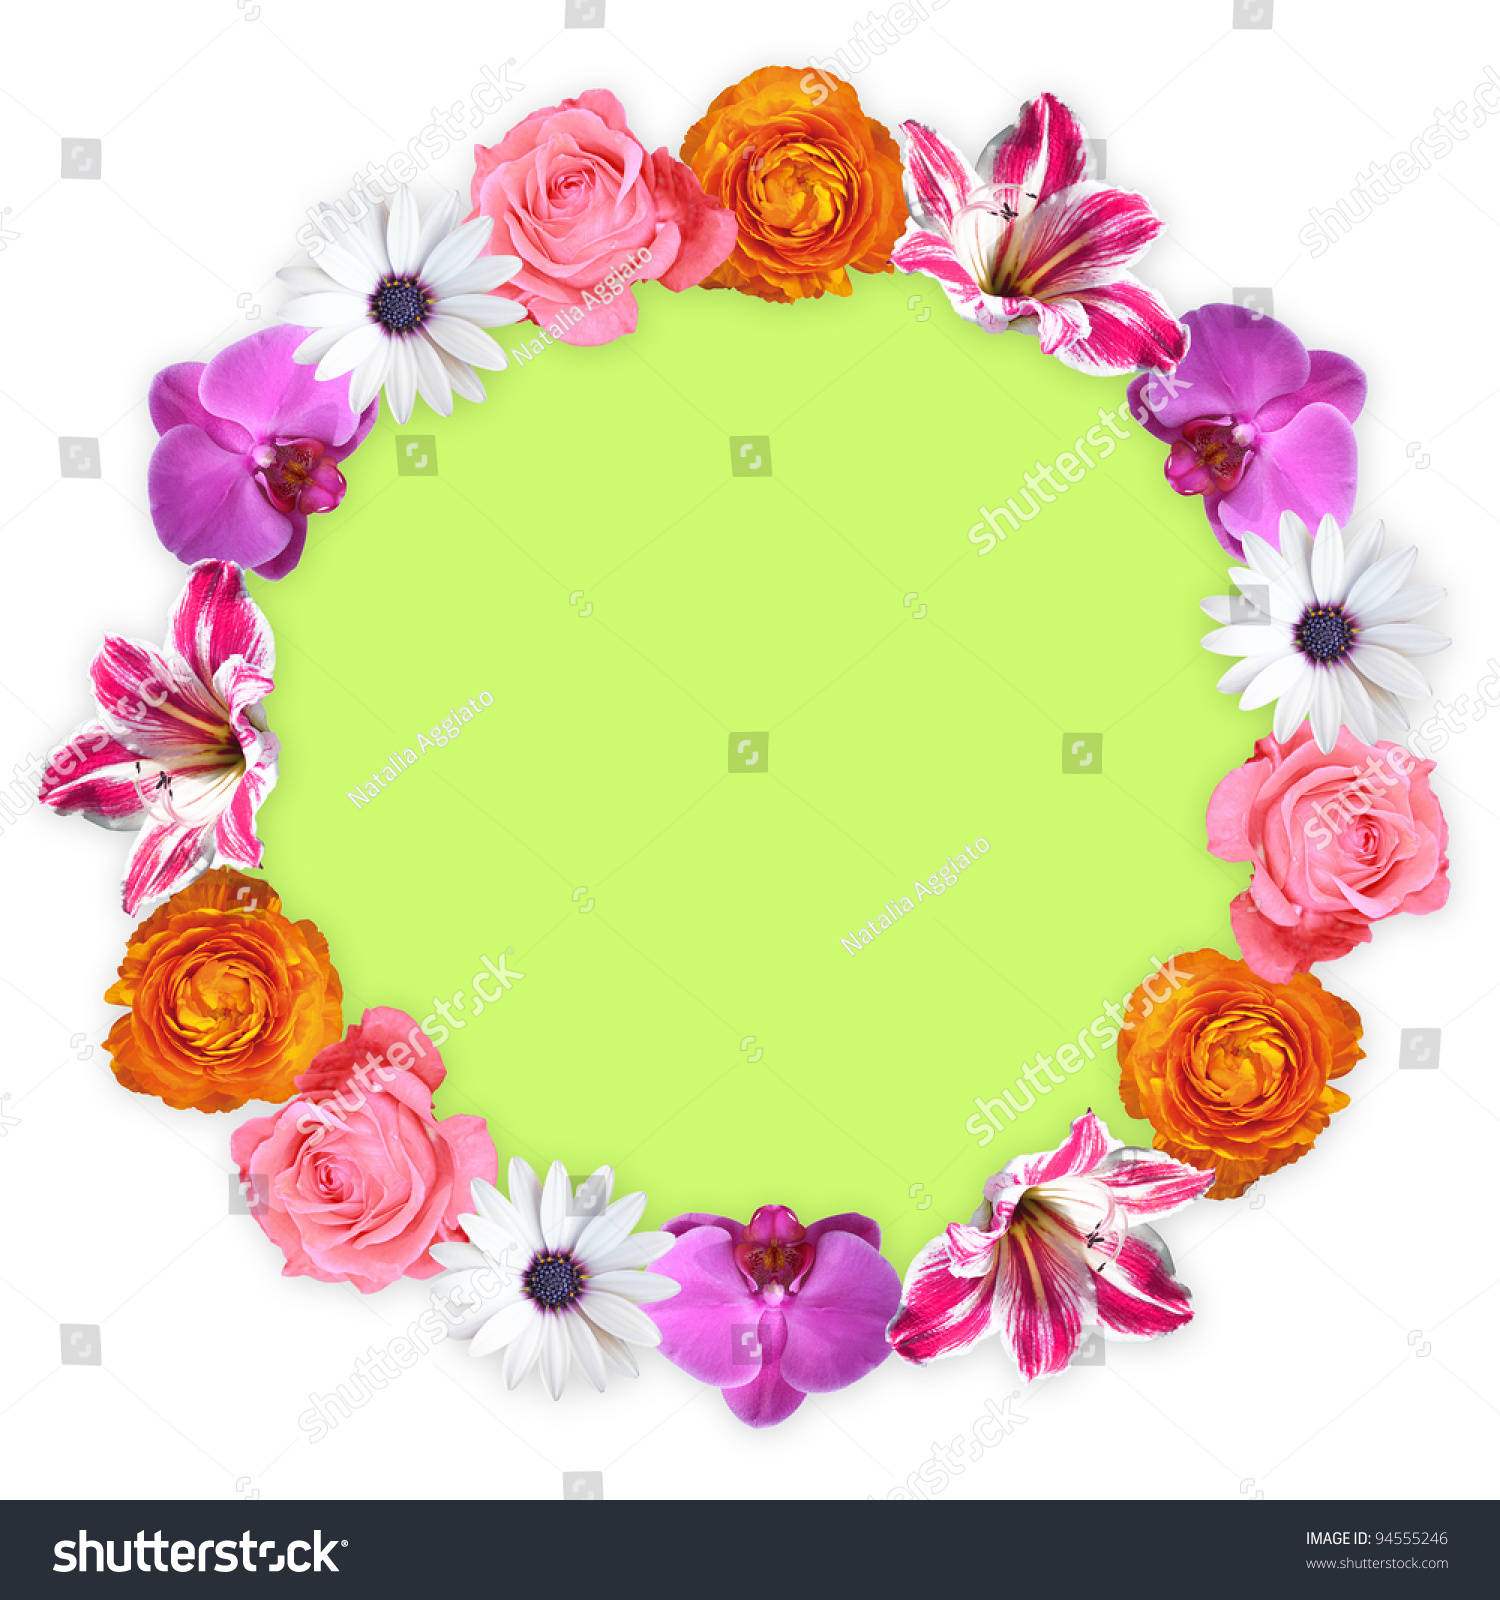 Circle Of Colorful Flowers Stock Photo 94555246 : Shutterstock